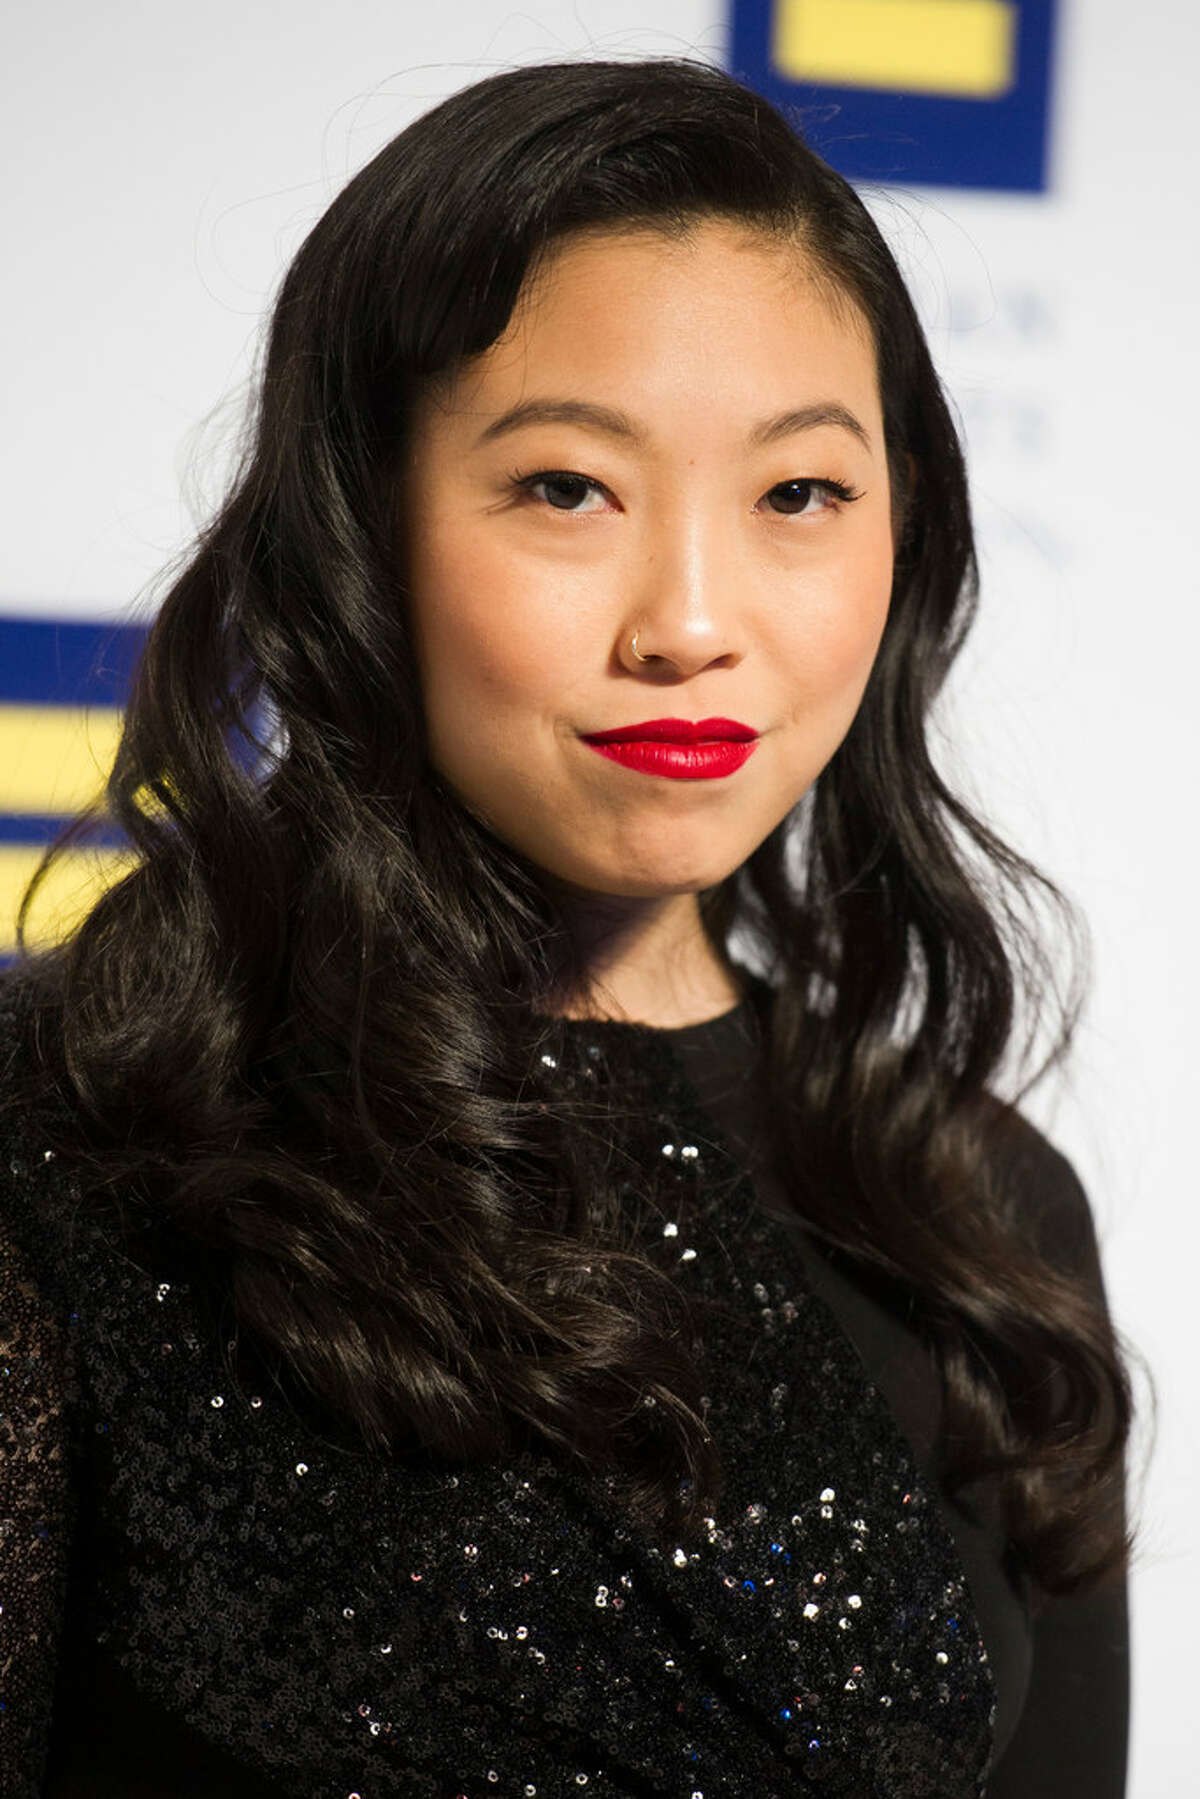 Actress Awkwafina arrives at the Human Rights Campaign National Dinner in Washington, D.C., Saturday, Sept. 15, 2018. (AP Photo/Cliff Owen)